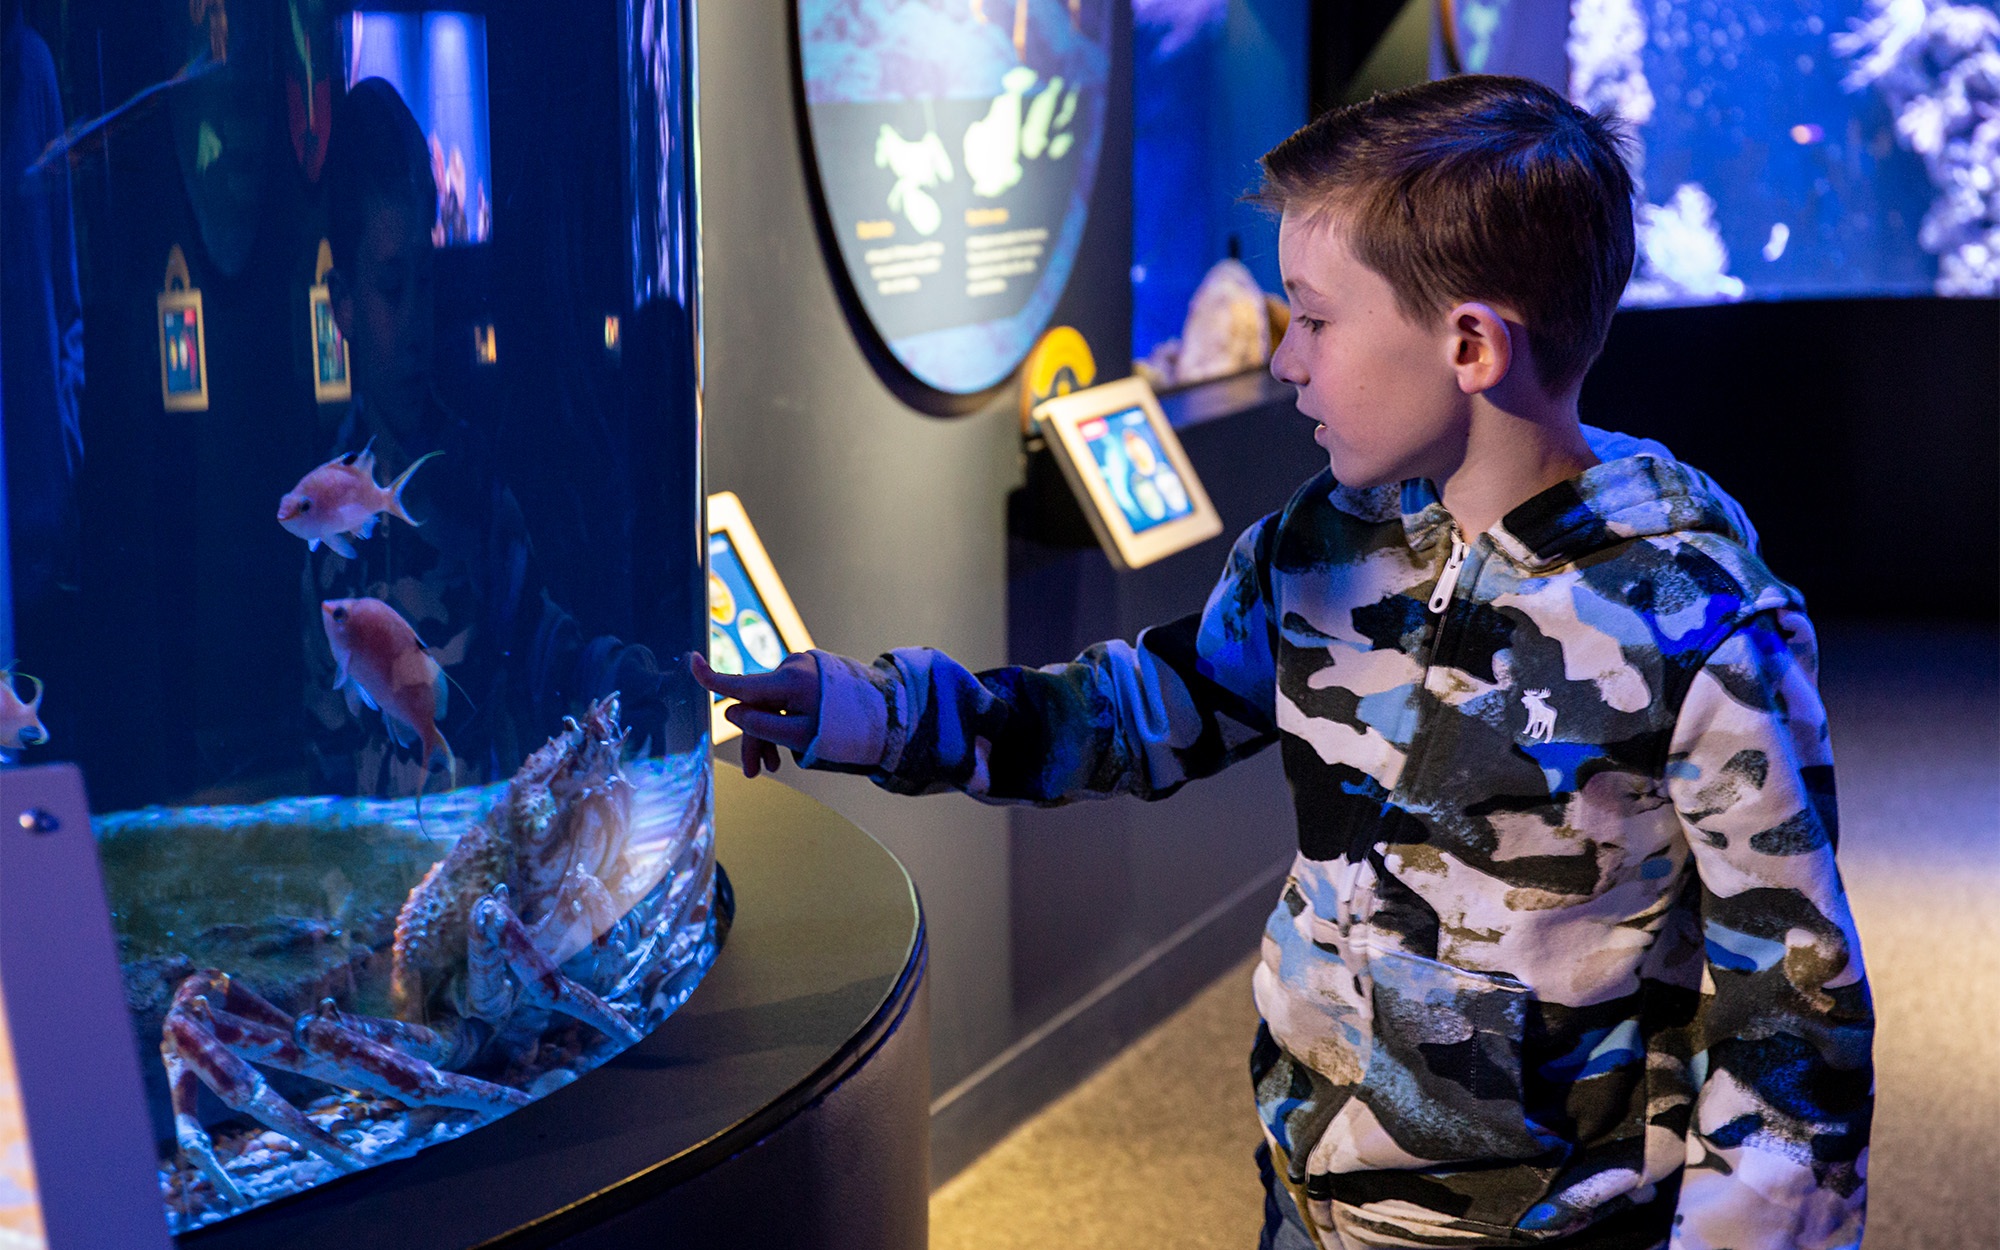 Aquarium visitor pointing at the fish in the tank